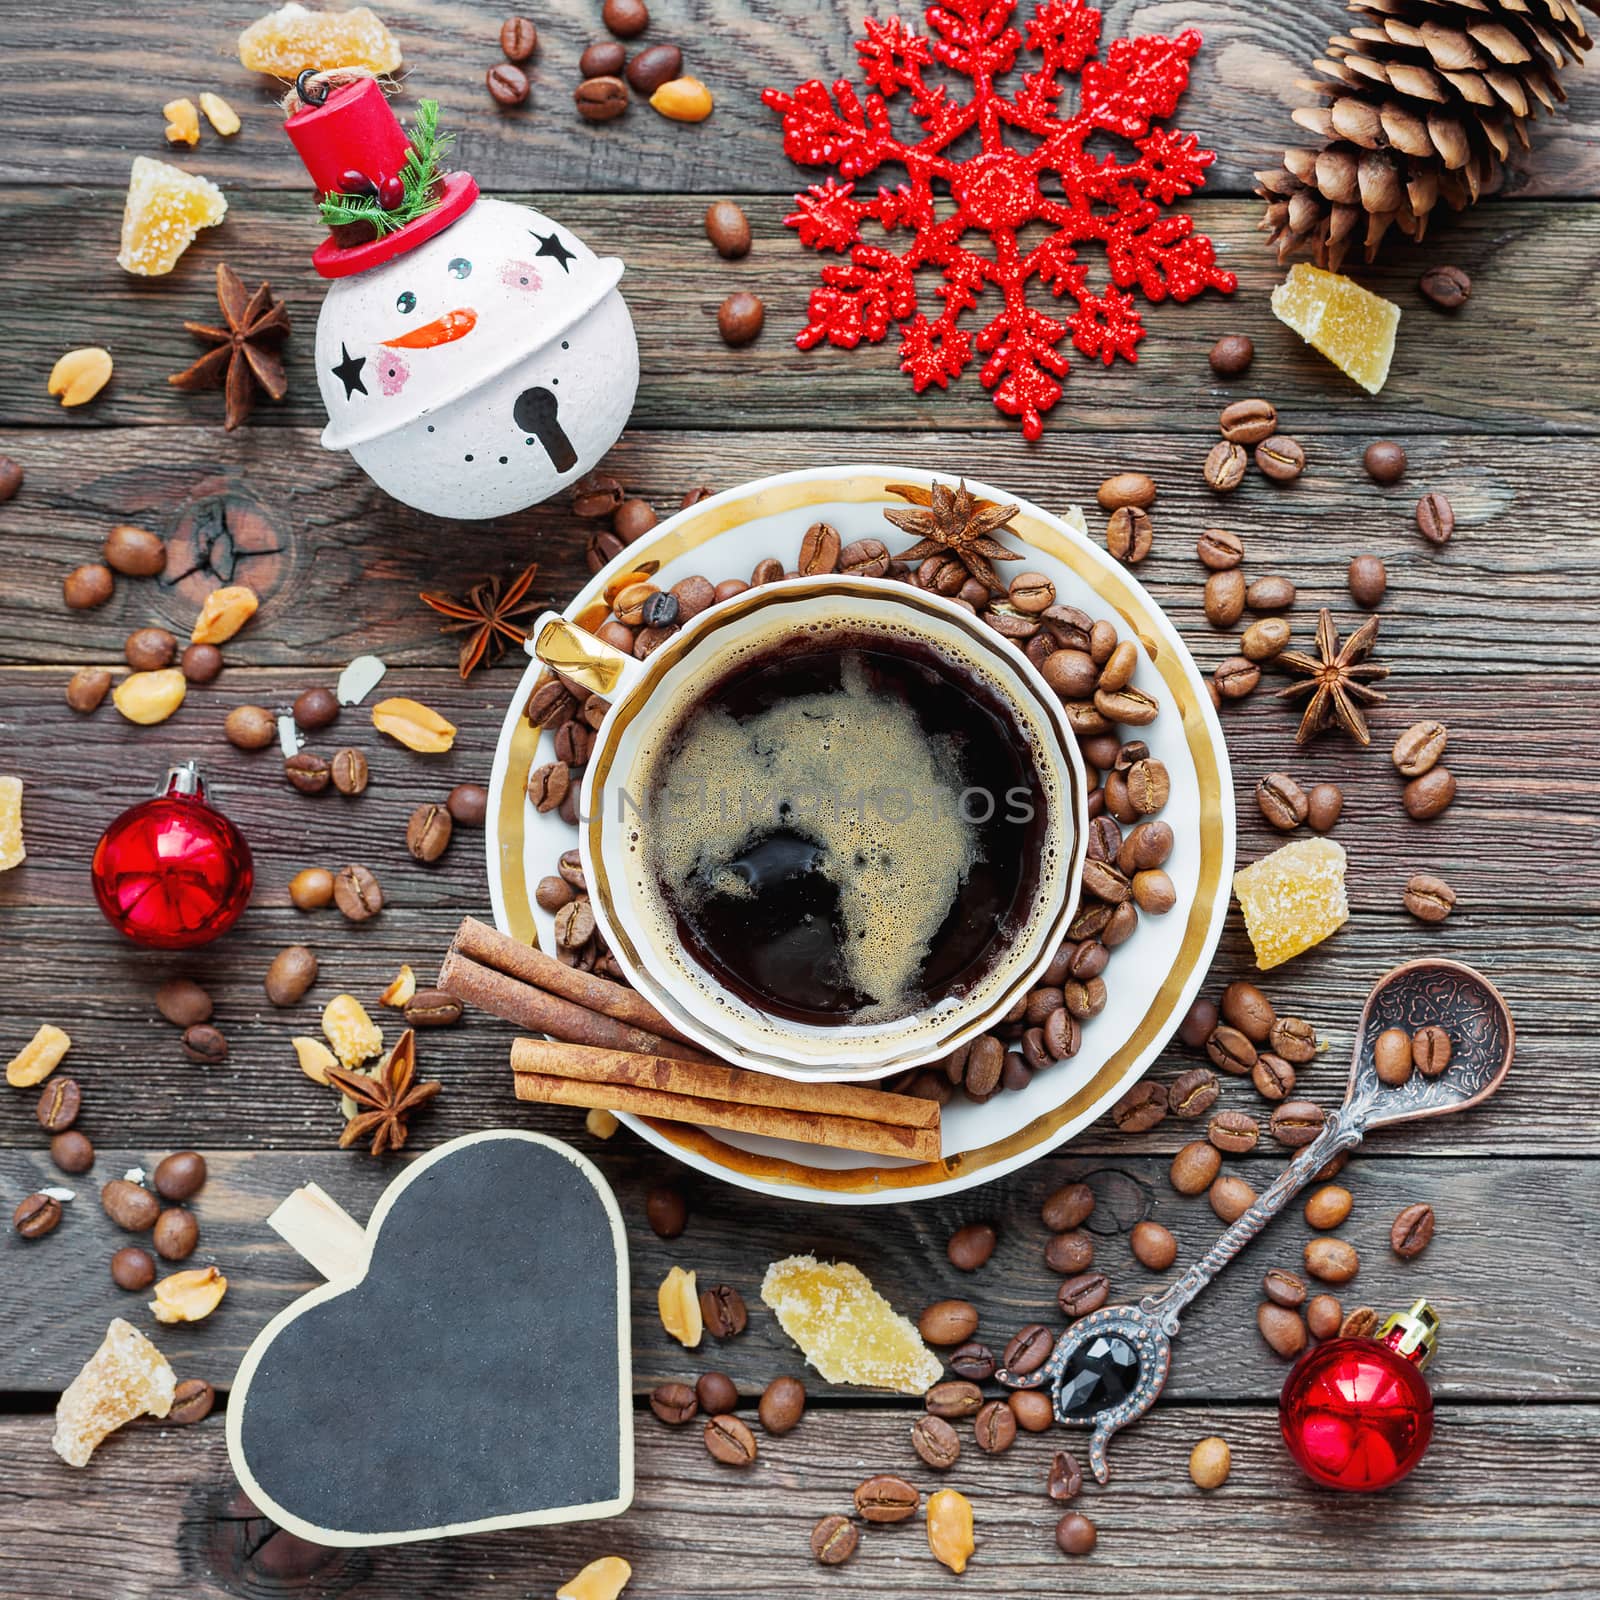 Rustic wooden background with cup of coffee and New Year decorations. Heart shaped chalkboard. Christmas beverage with ginger and anise. Top view, place for text. by aksenovko